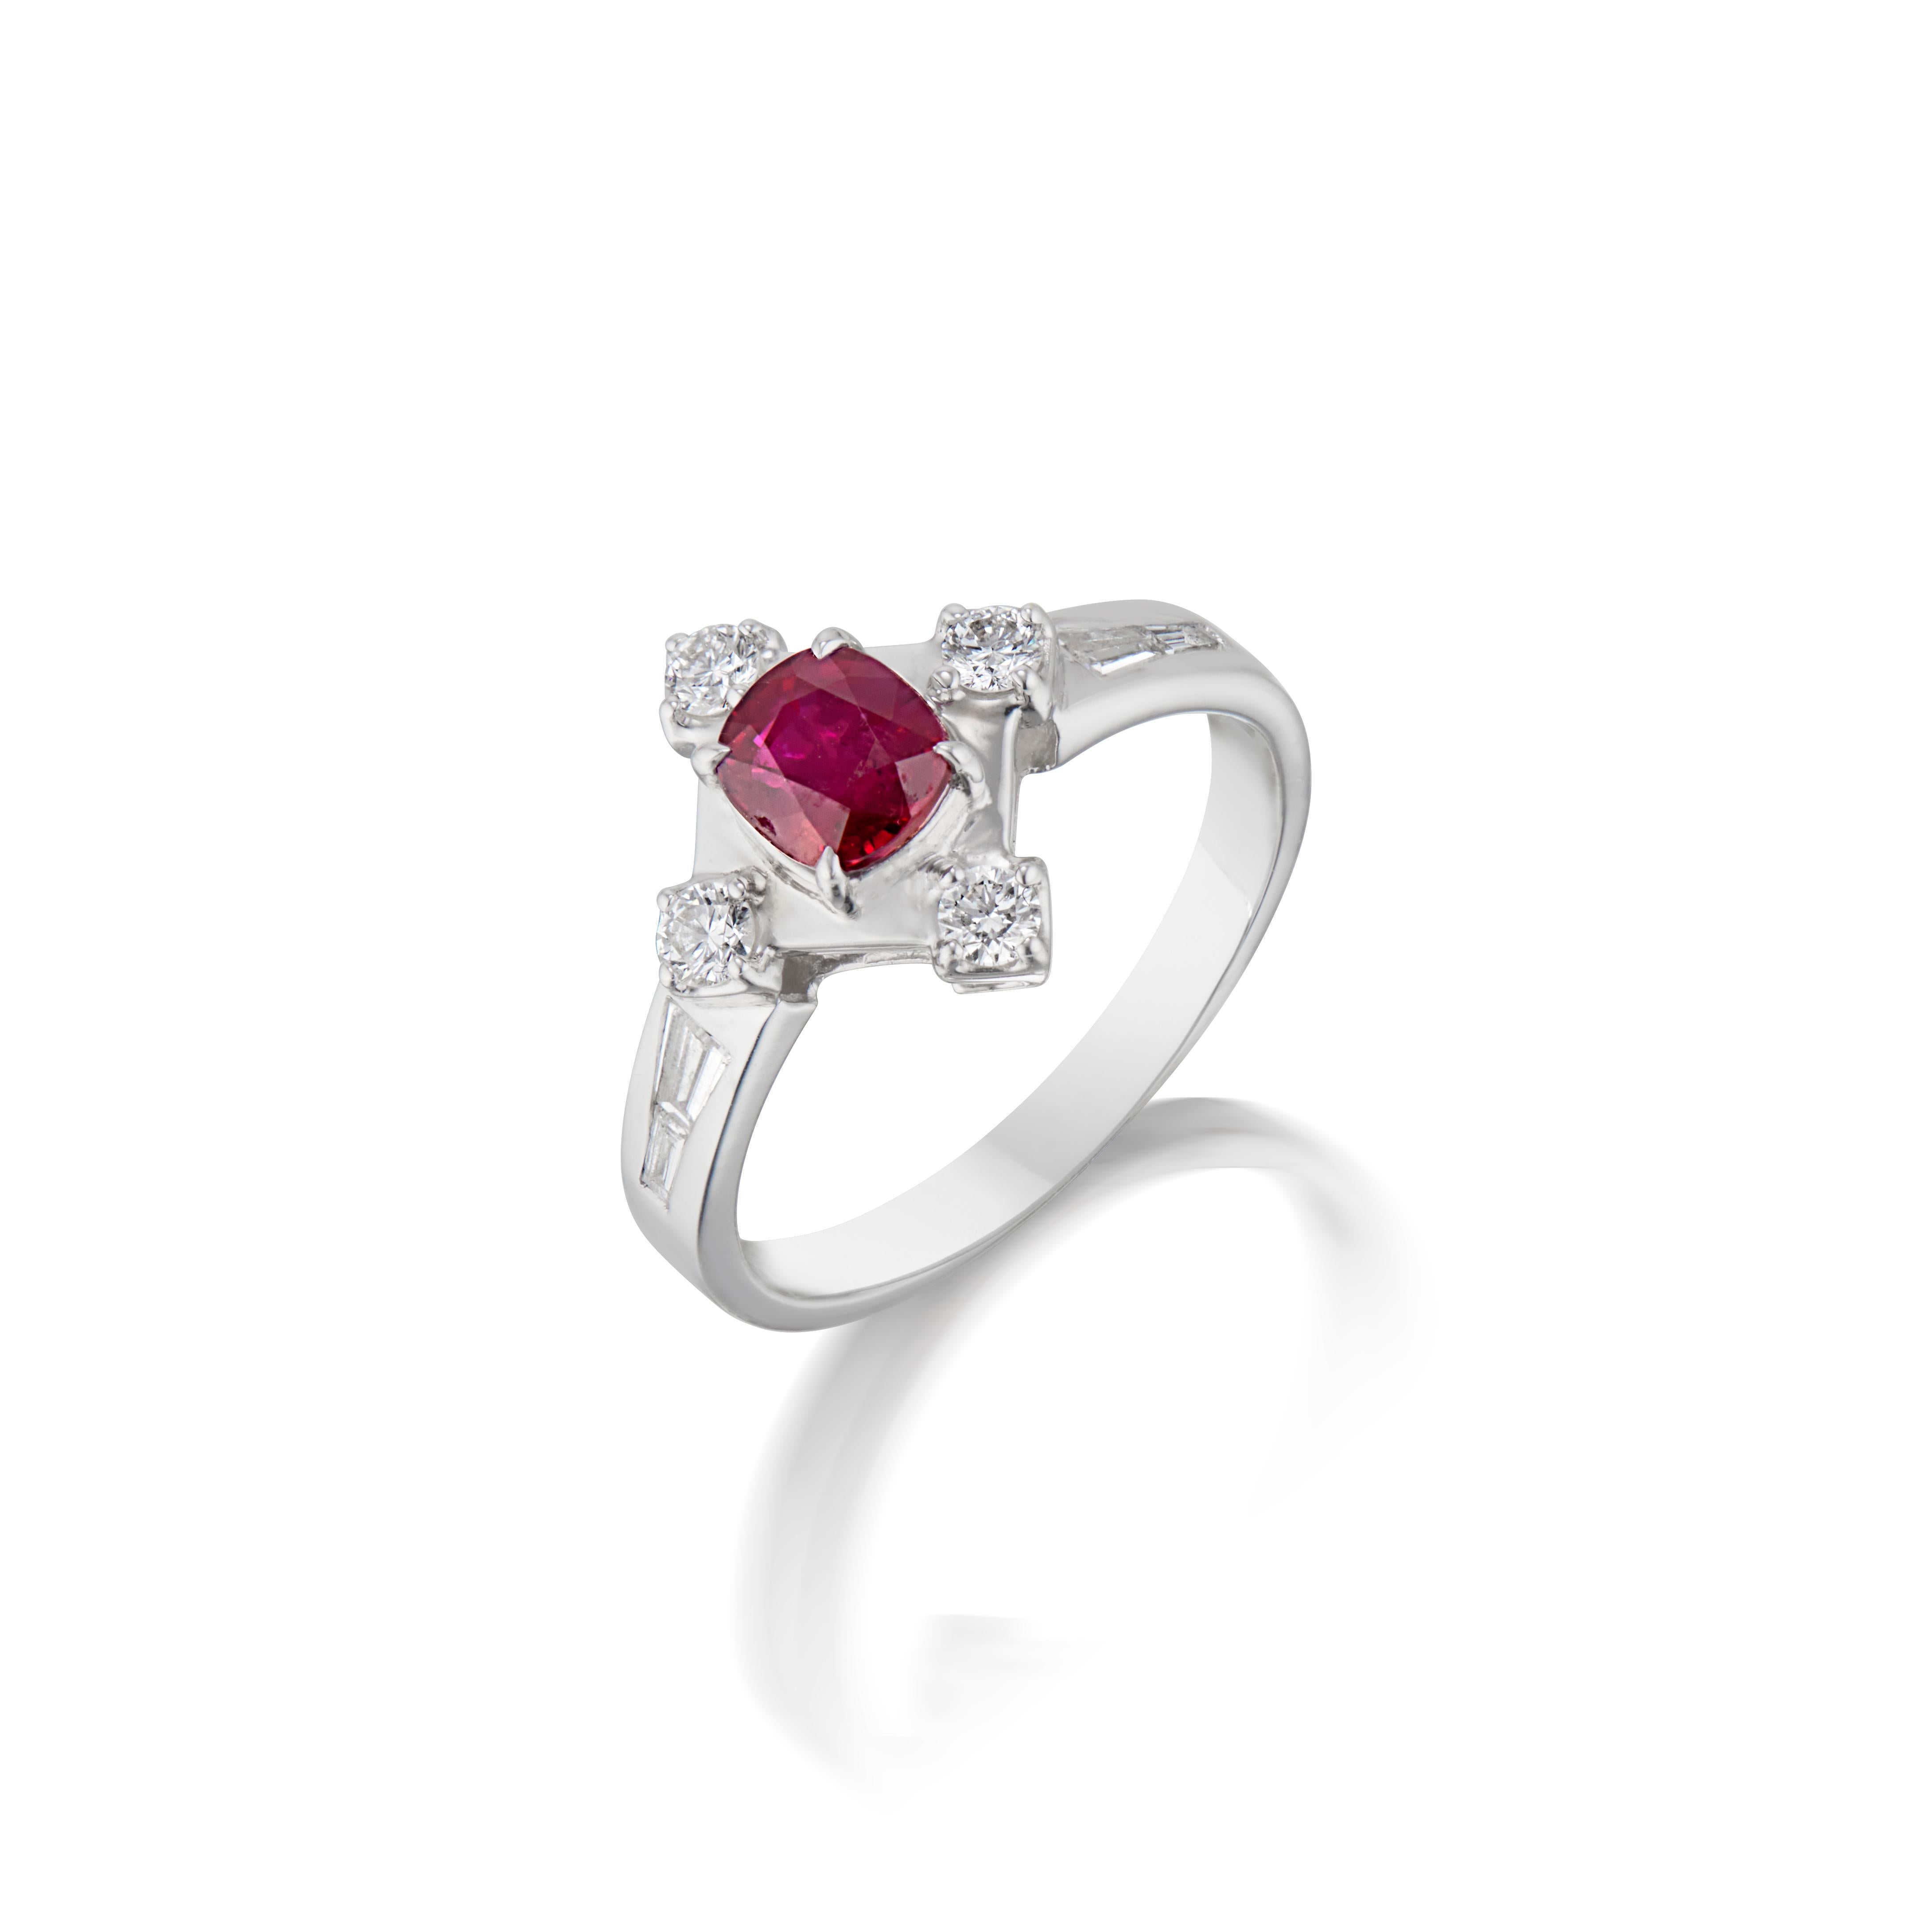 18K WHITE GOLD 
4 ROUND DIAMONDS  0.23 CARATS
4 TAPERED DIAMONDS  0.23 CARATS
1 NO-HEAT PIGEON BLOOD BURMESE RUBY  1.08 CARATS
GUBELIN LAB CERTIFIED, PIGEON BLOOD RED

Introducing our exquisite 1.08 carat Burmese ruby ring, a captivating blend of